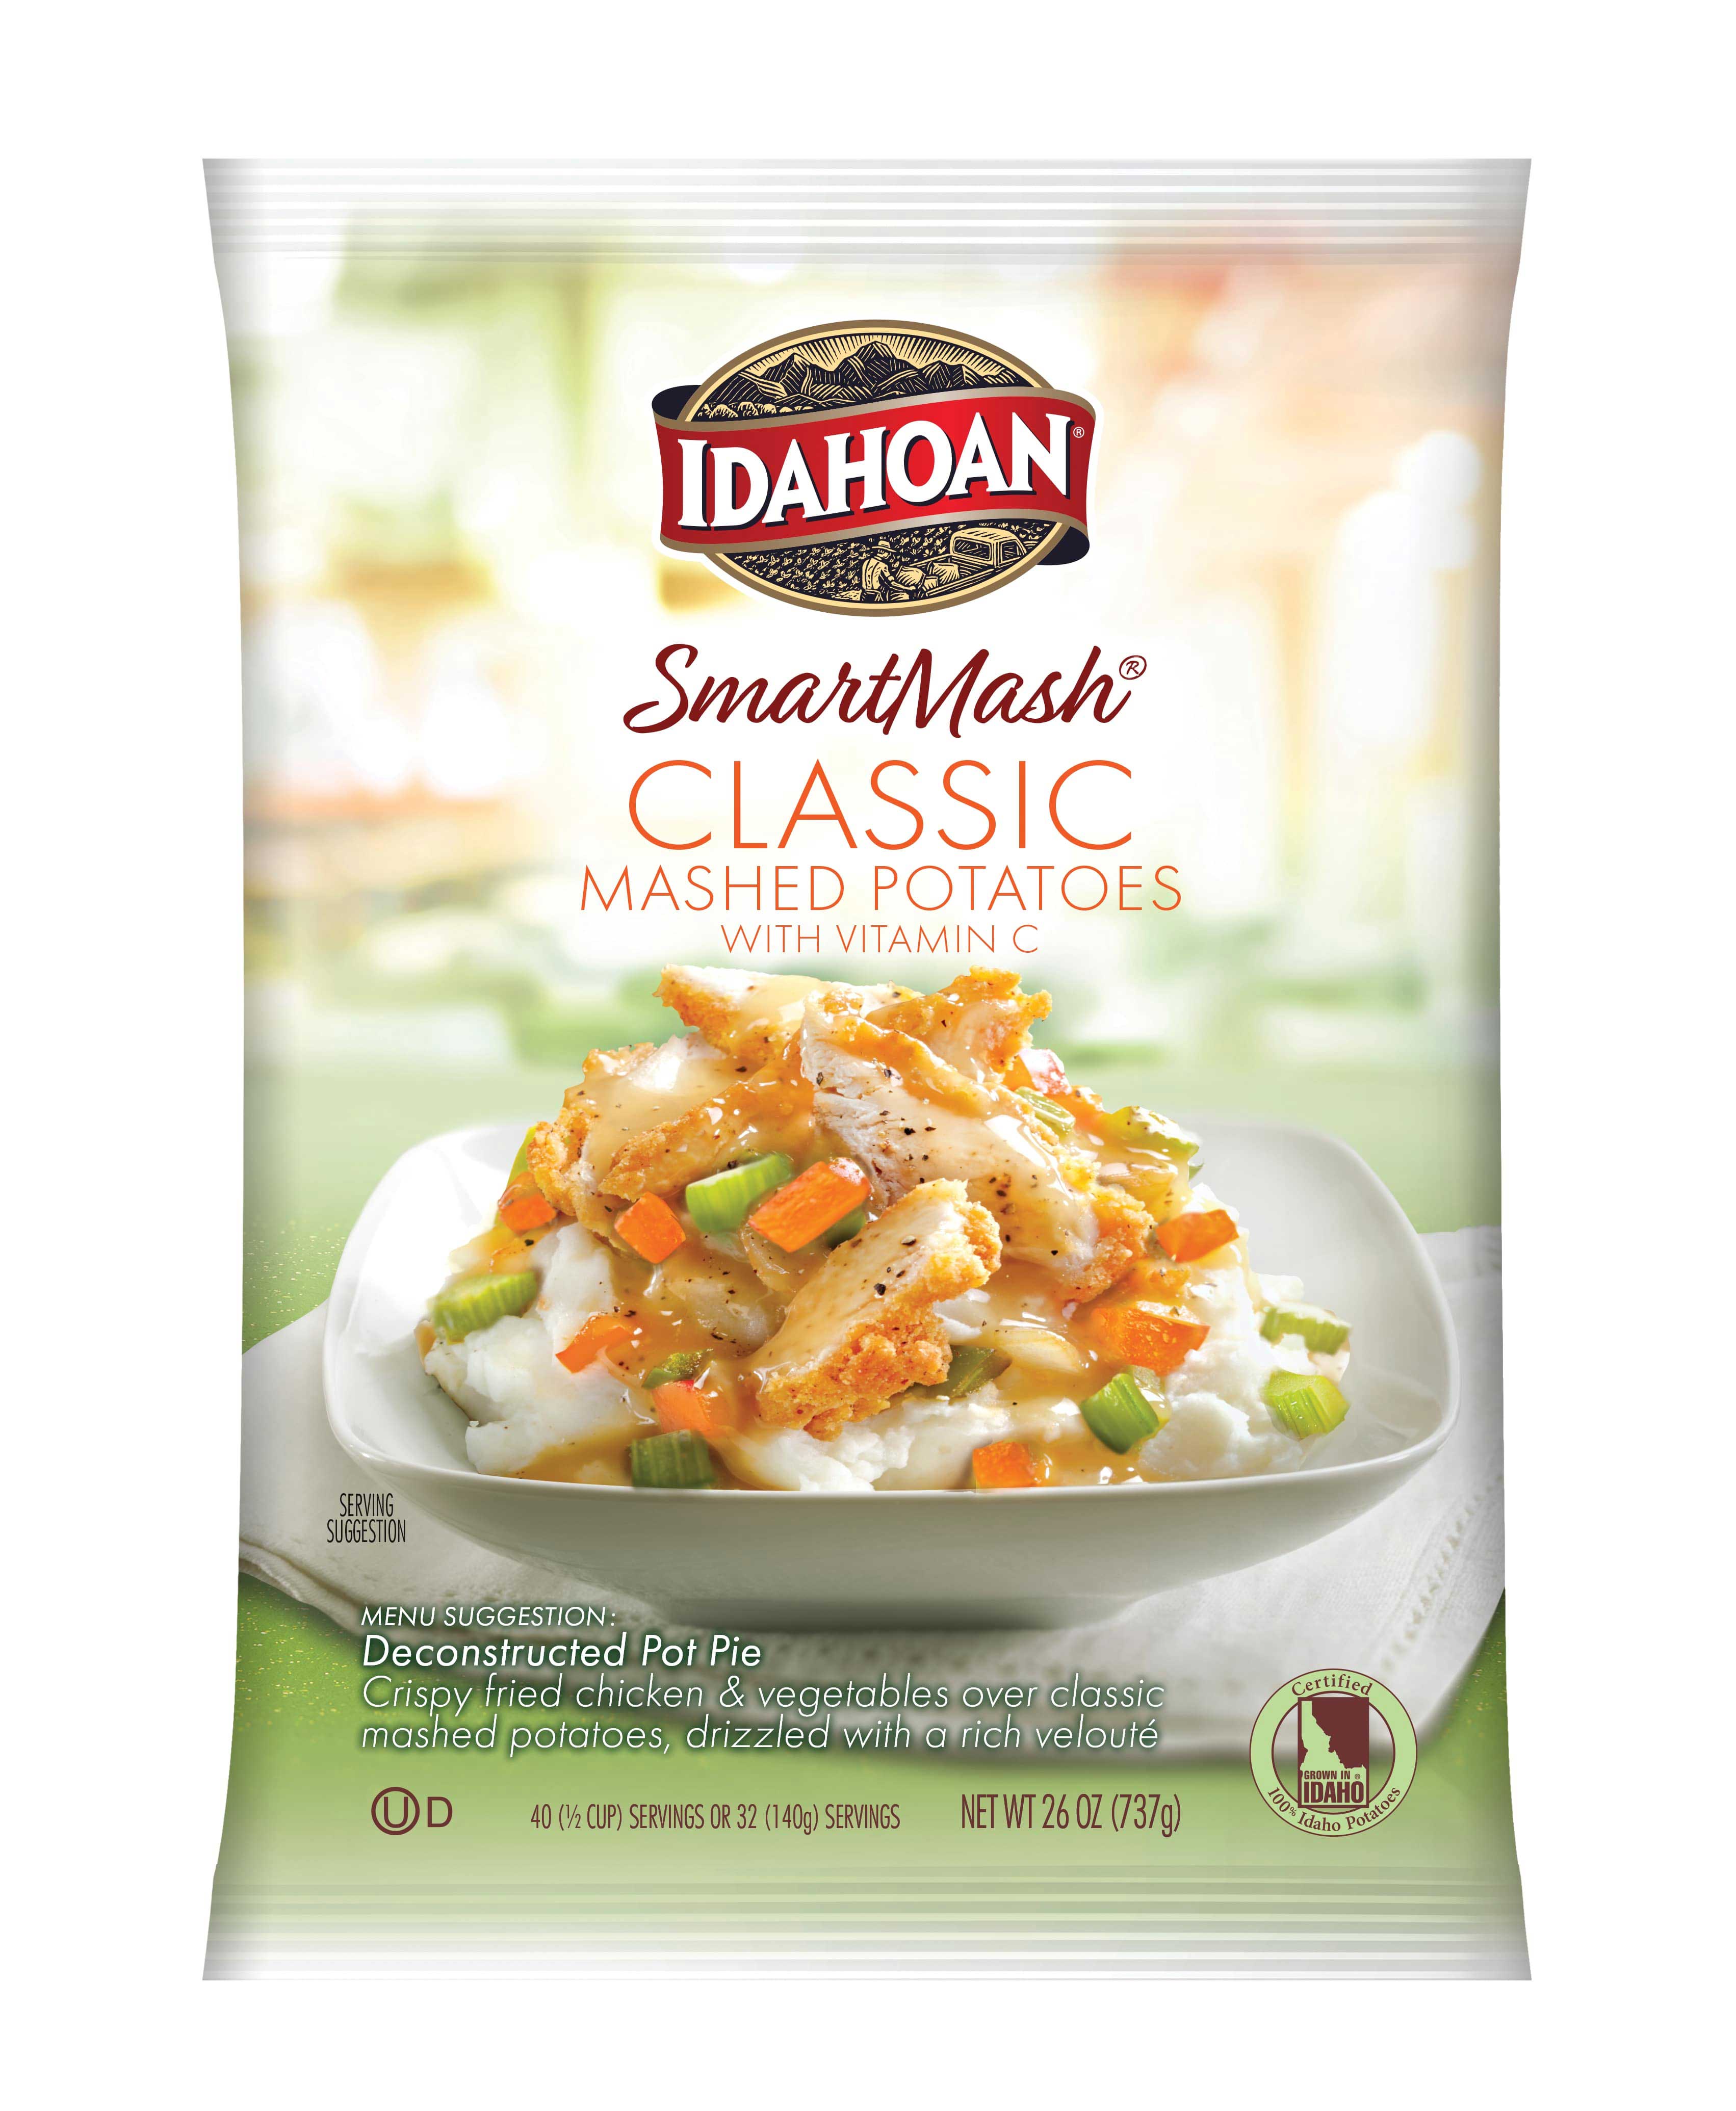 Idahoan Real Mashed Potatoes with Vitamin C, 26 Ounce -- 12 per case.